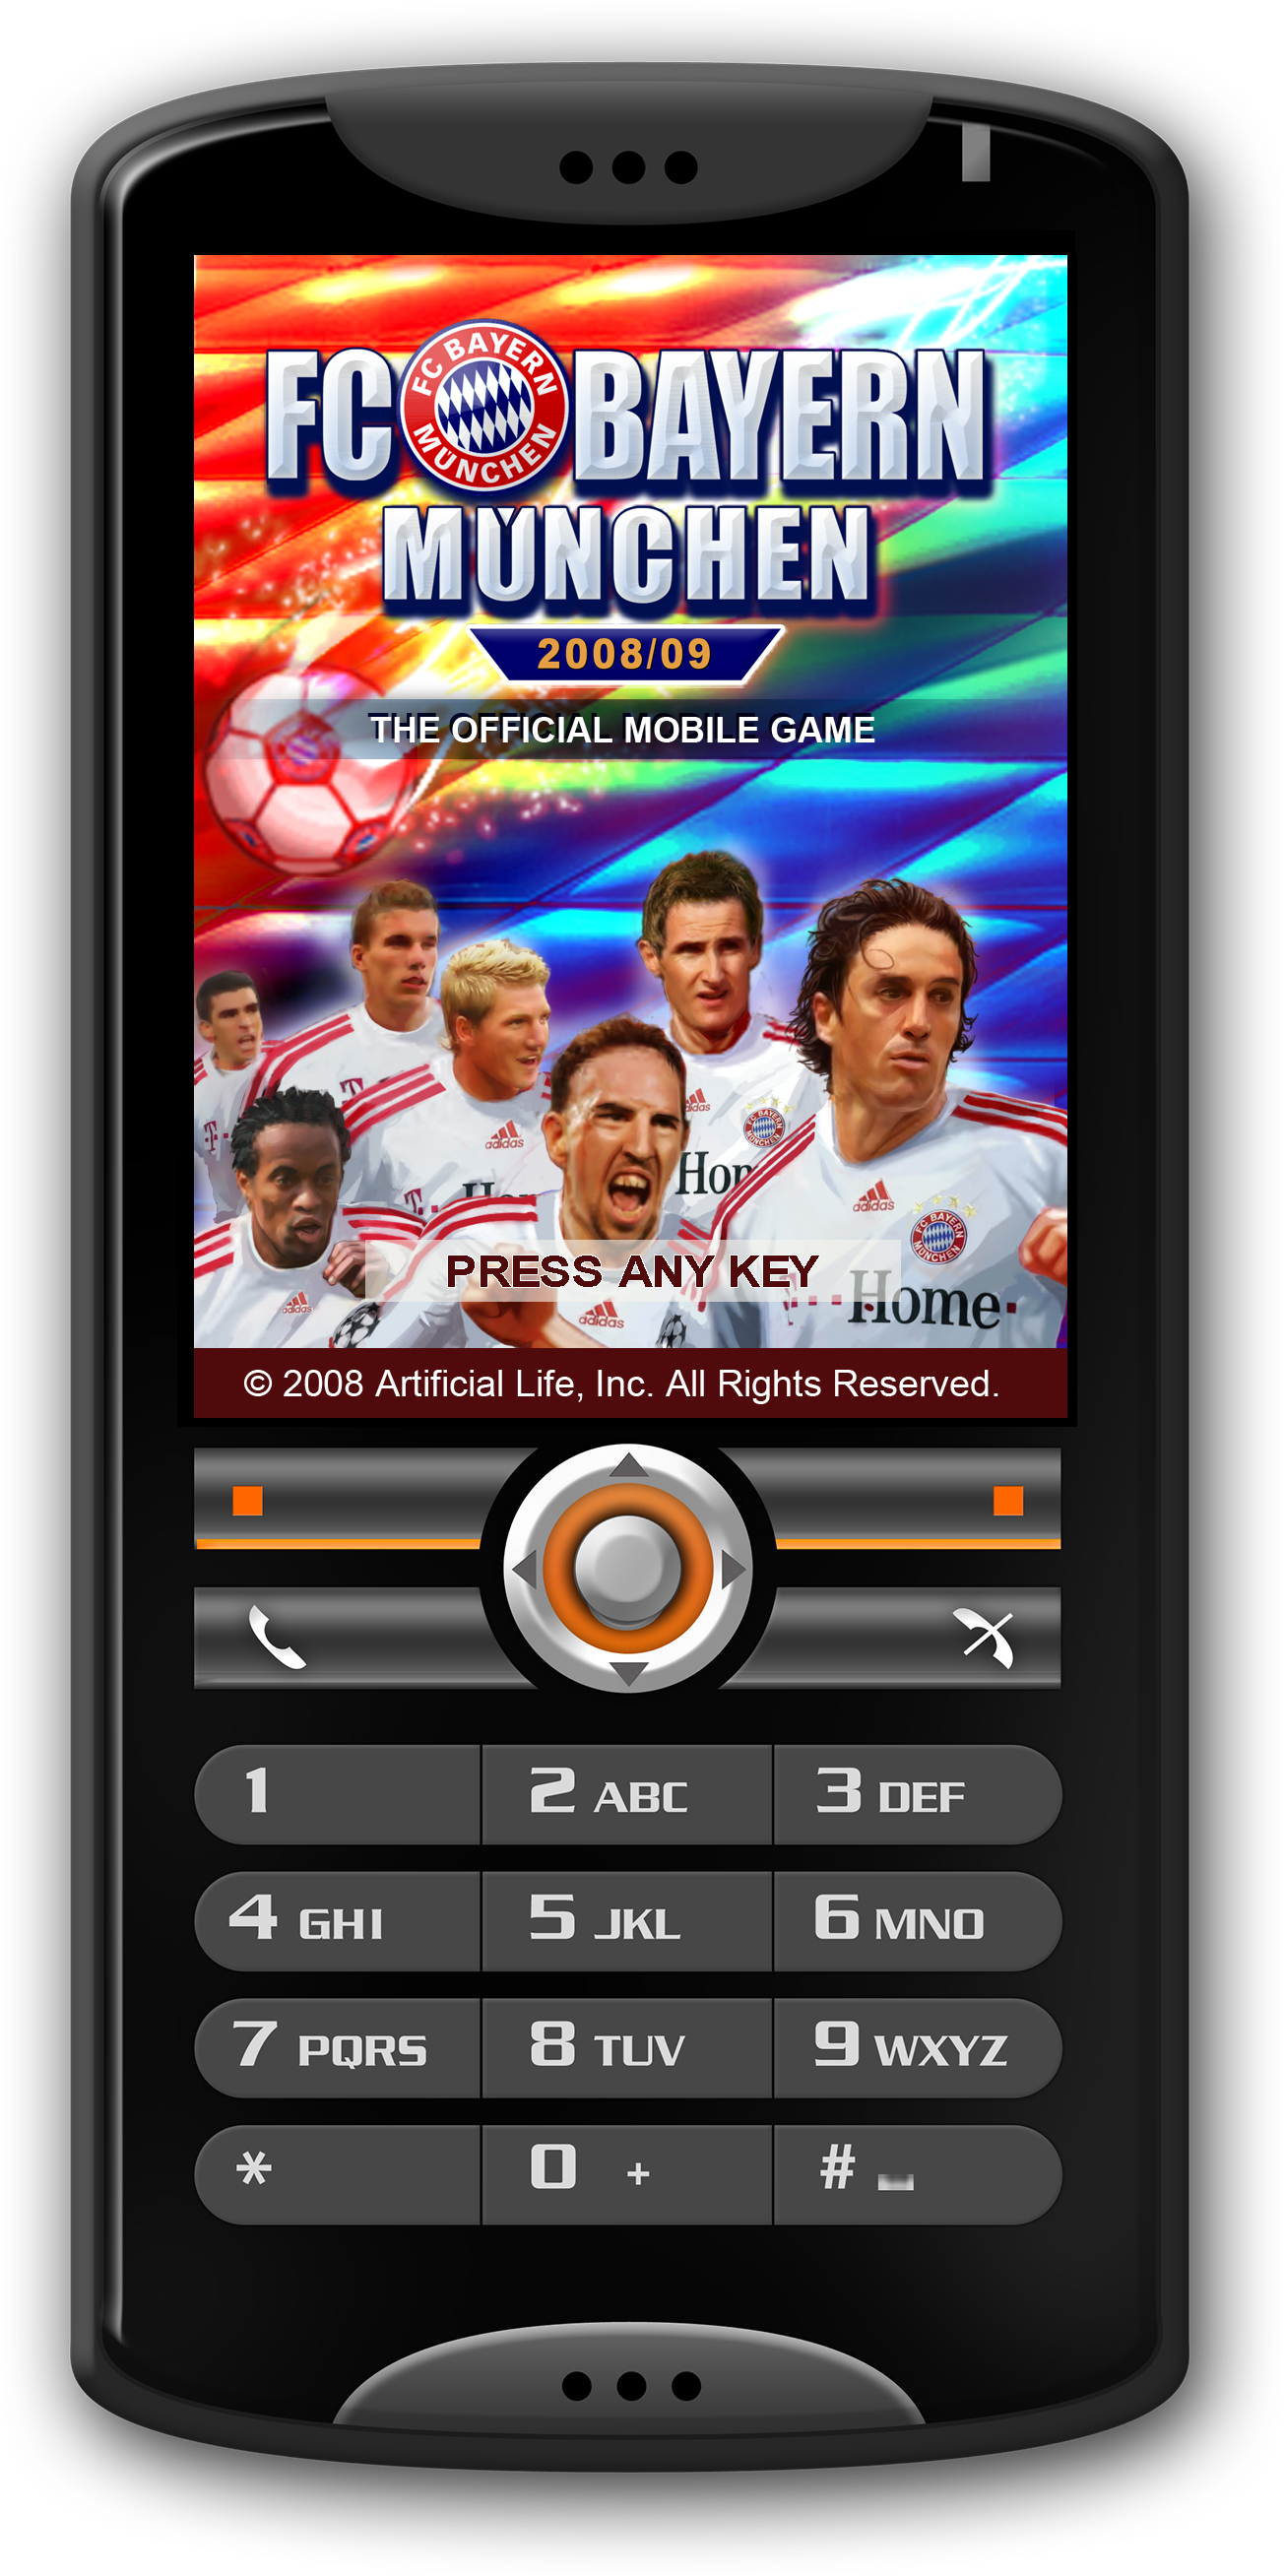 FC Bayern Munich 2008/09 - The Official Mobile